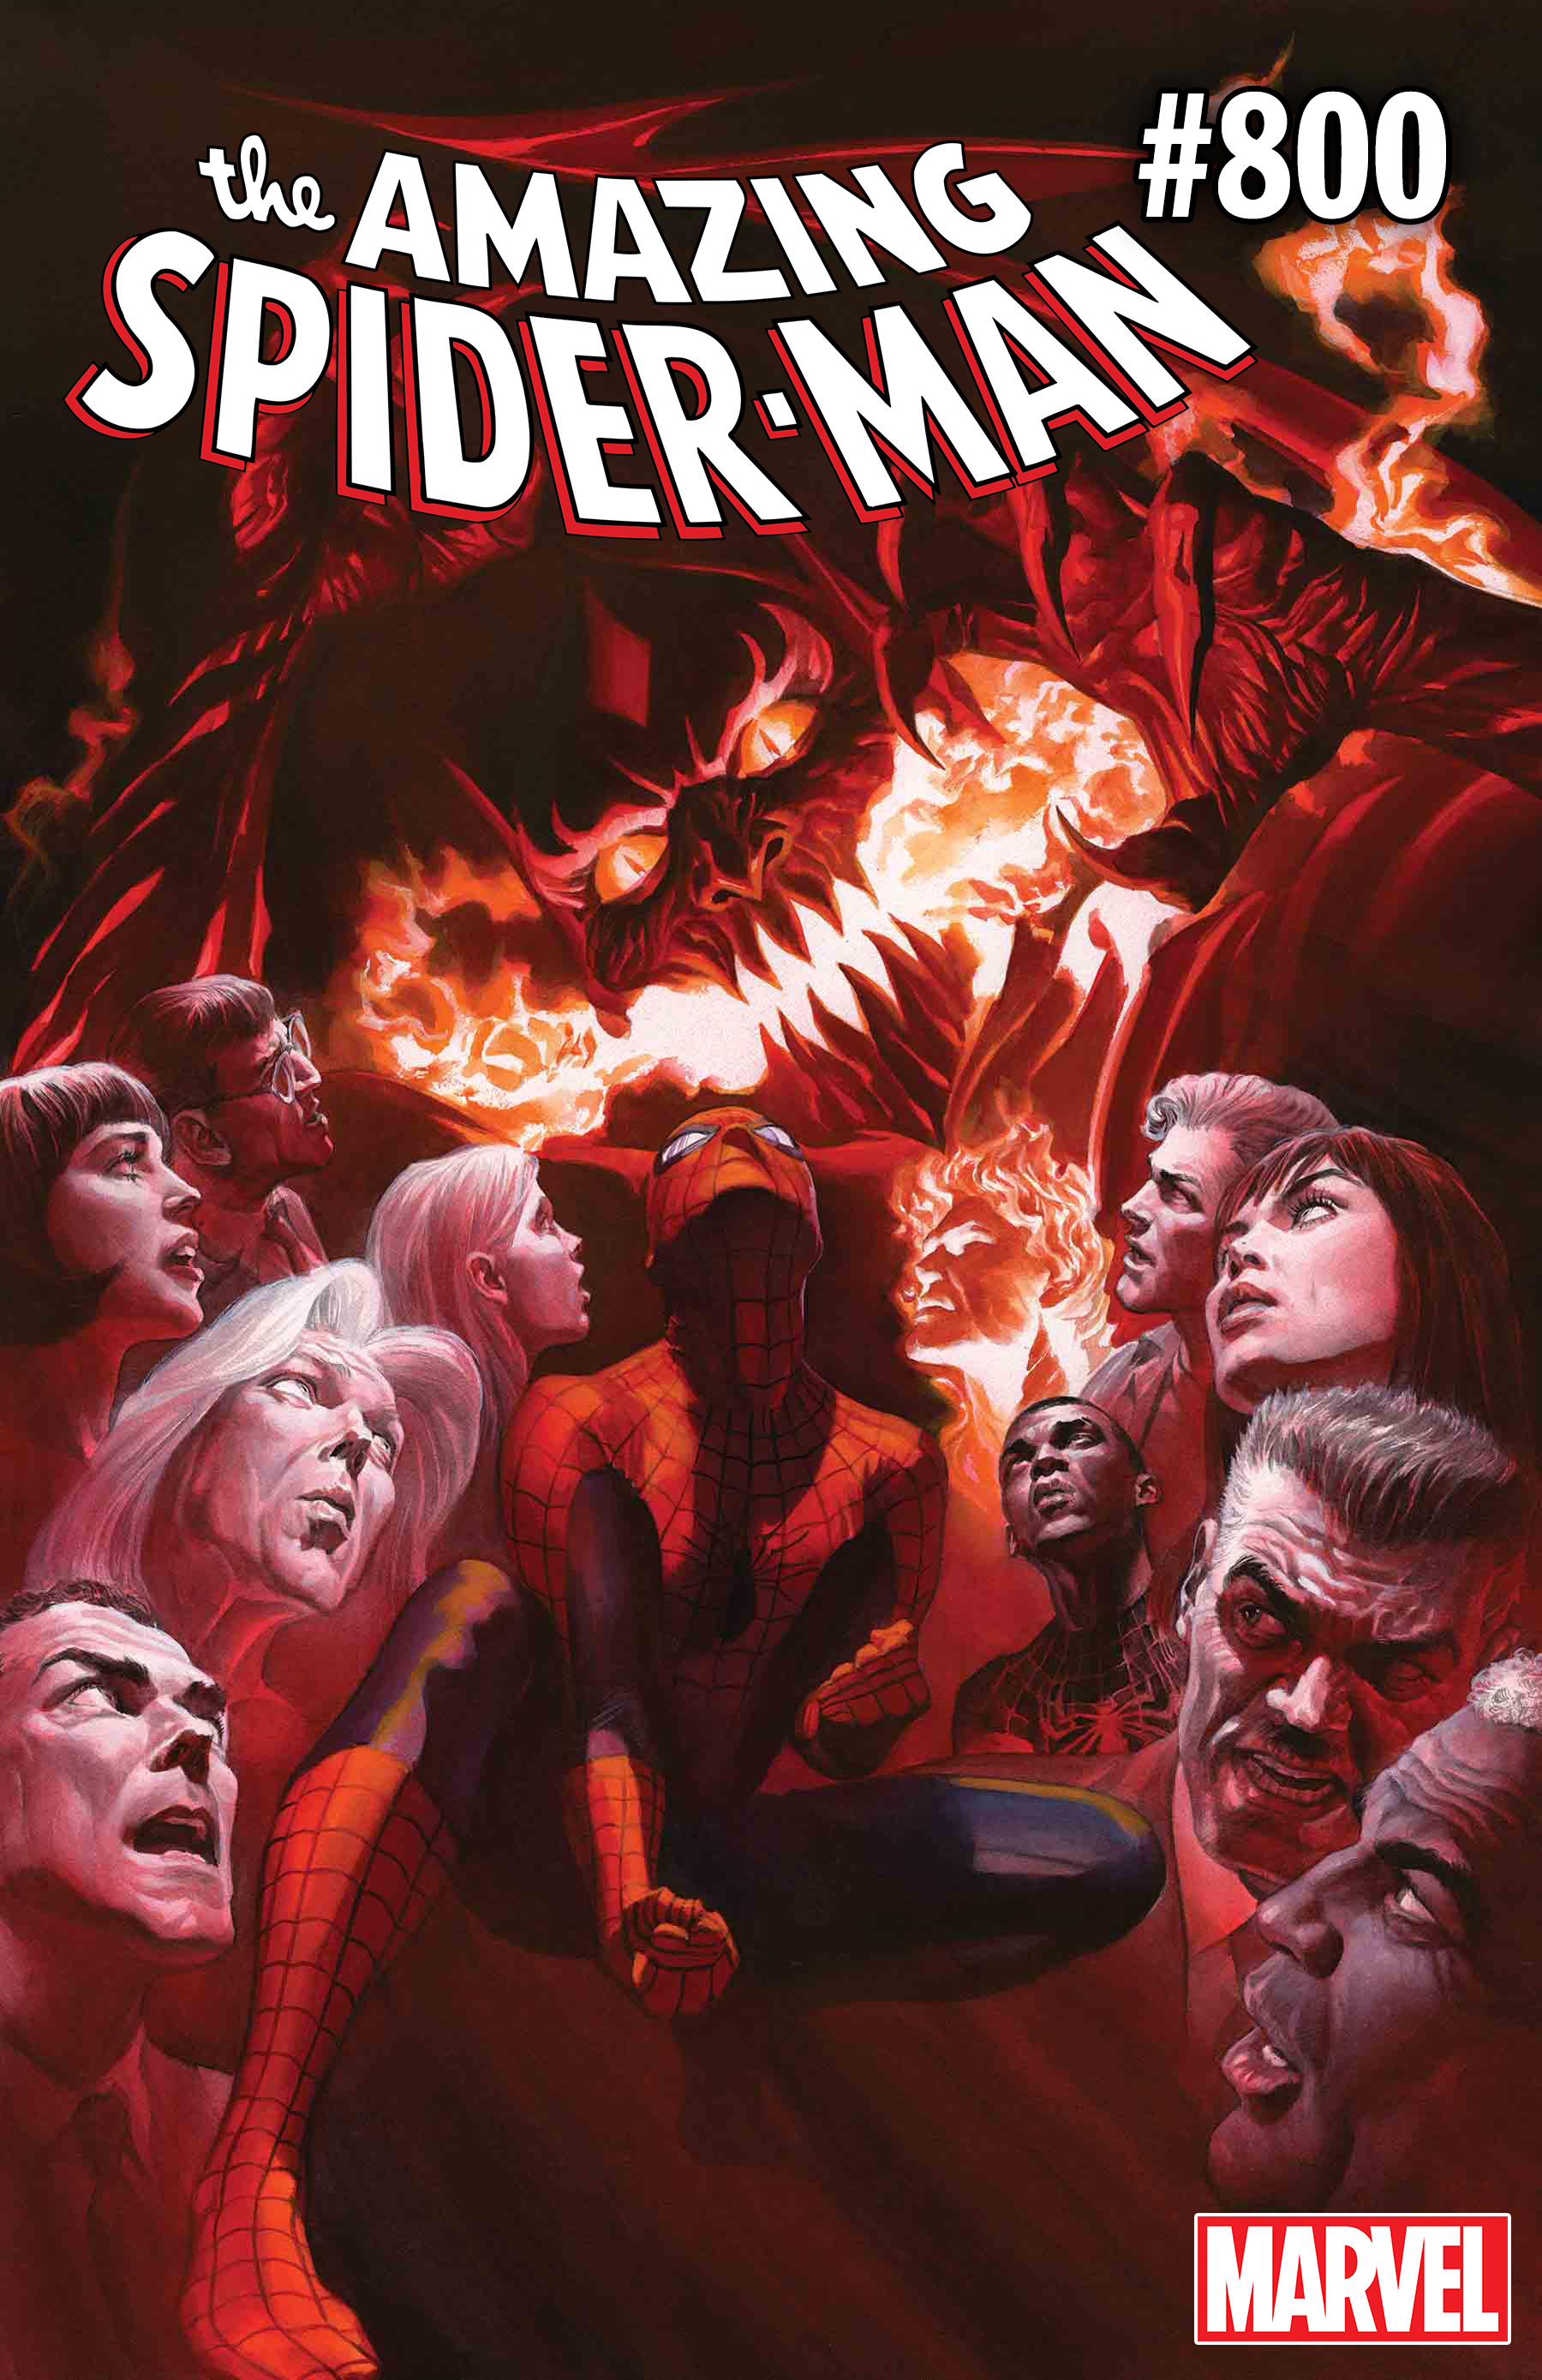 Amazing Spider-Man #800 brings the final showdown between Red Goblin and Spidey